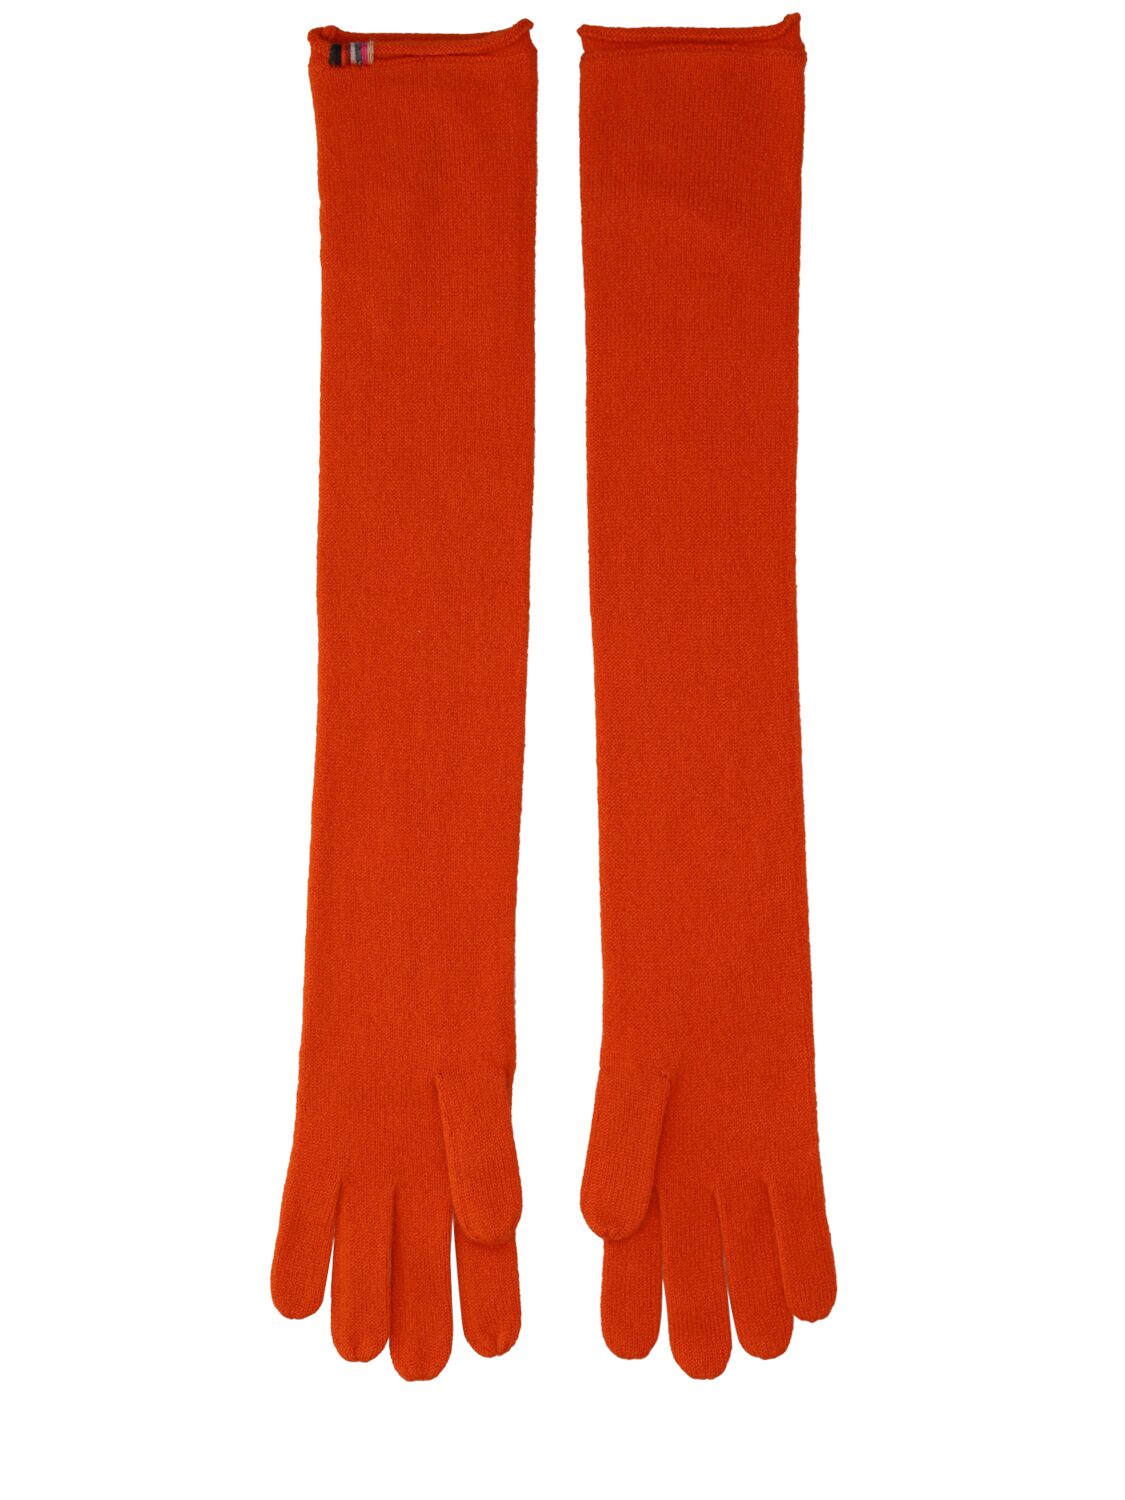 Cashmere Blend Knitted Gloves